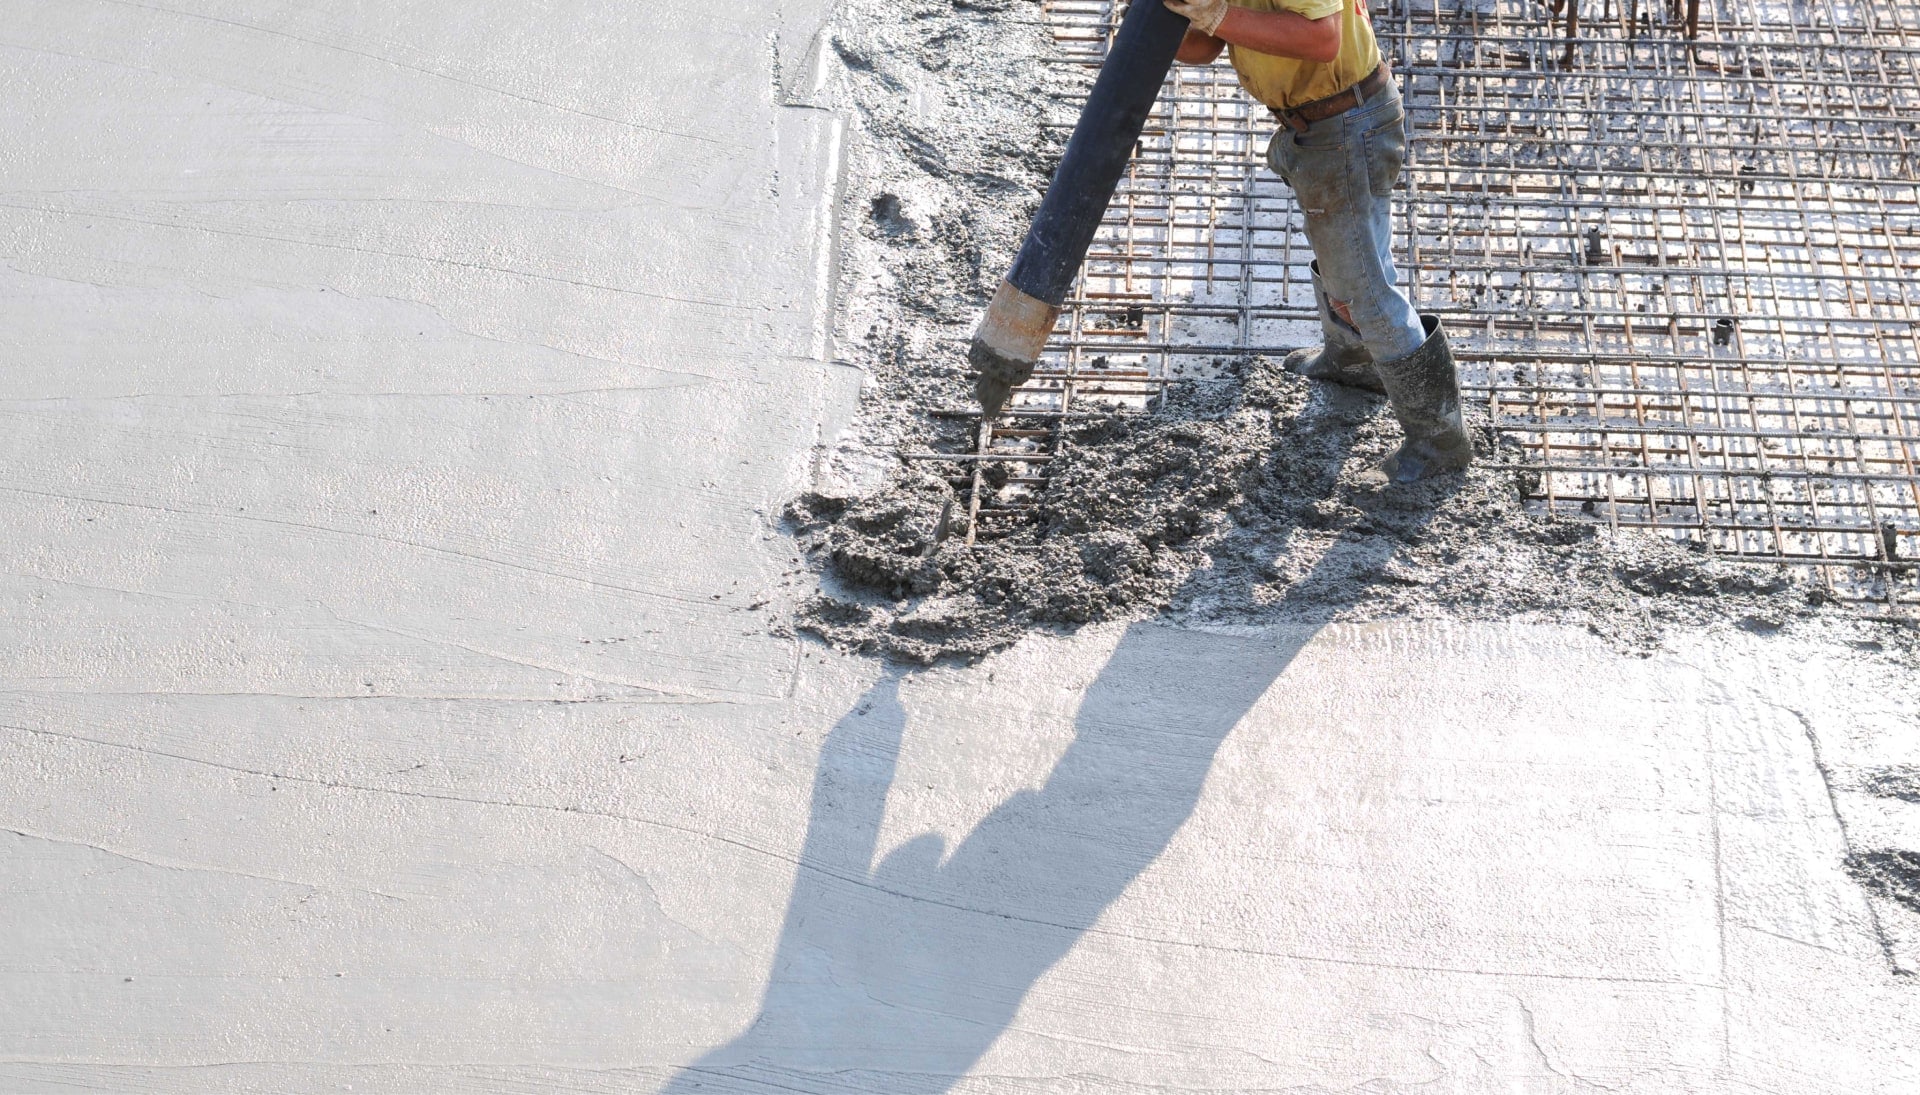 High-Quality Concrete Foundation Services Orlando Trust Experienced Contractors for Strong Concrete Foundations for Residential or Commercial Projects.